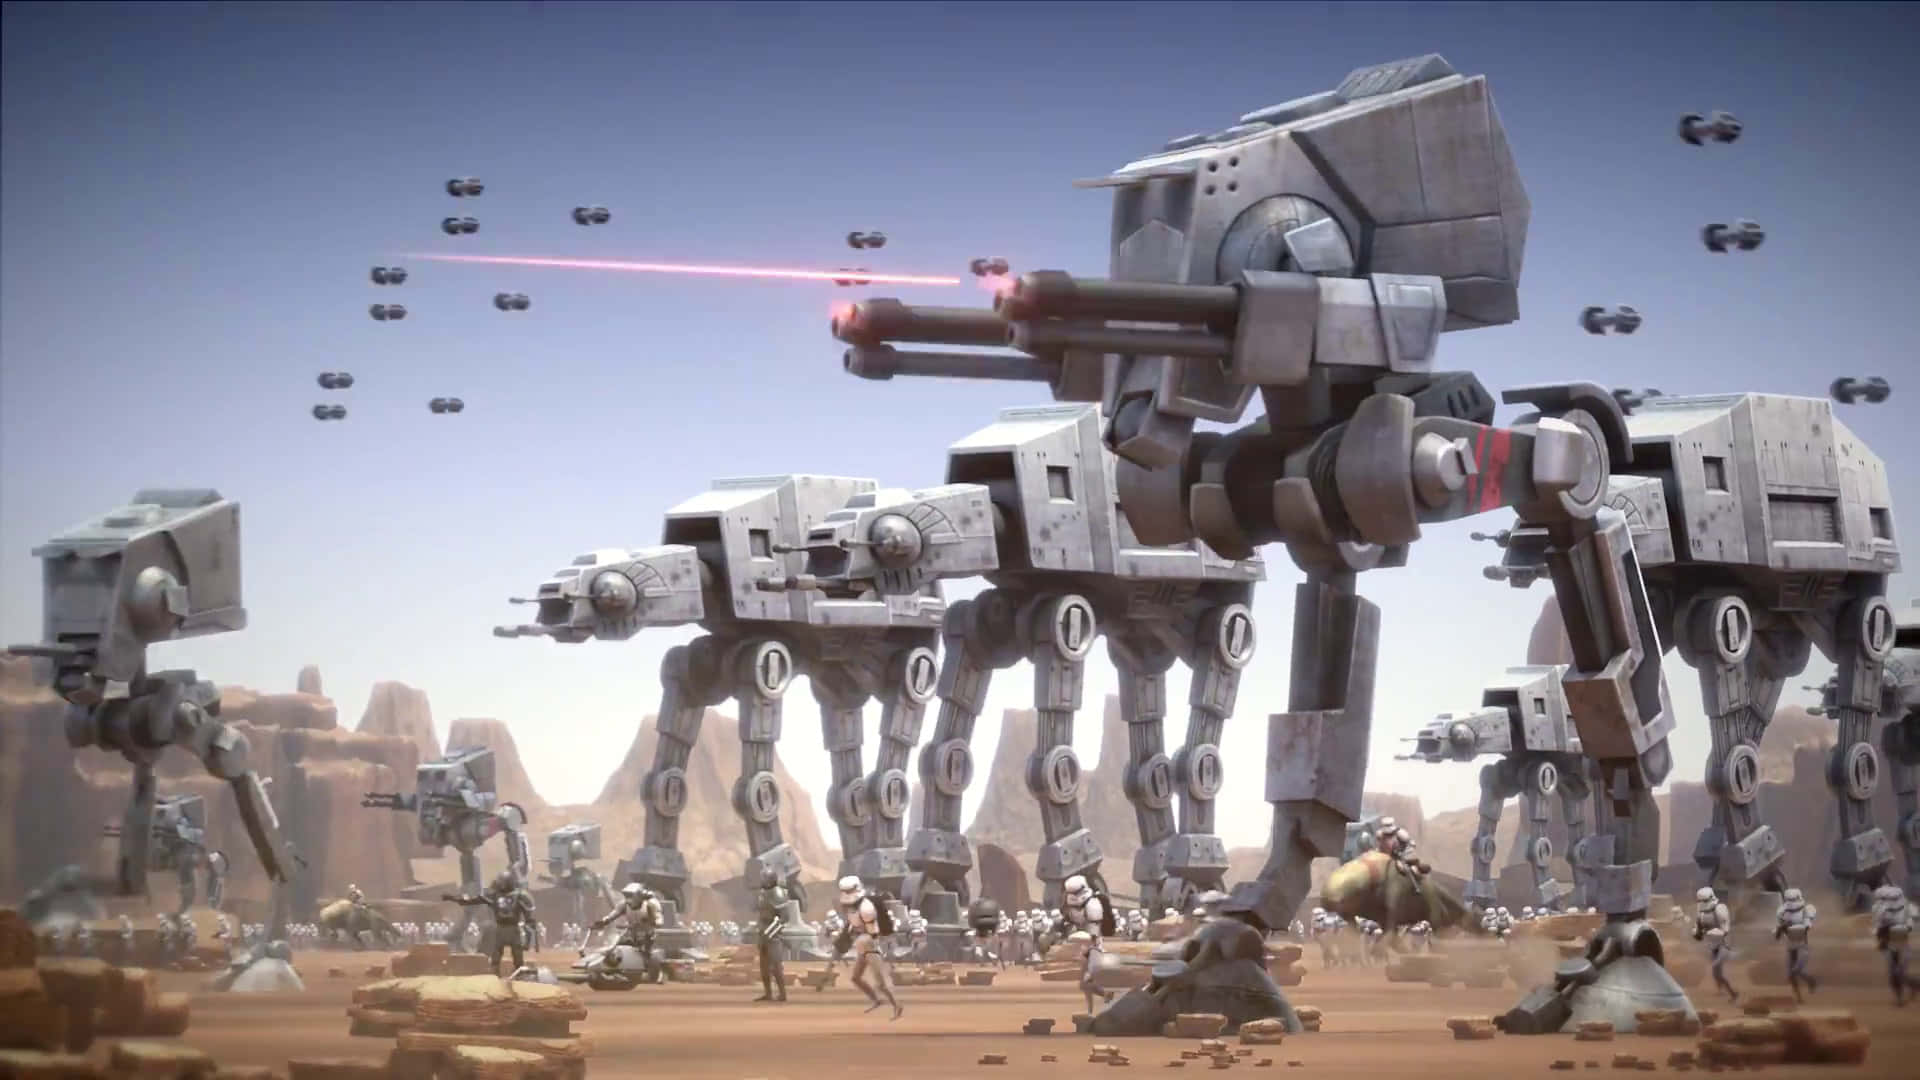 A detailed view of an AT-AT from a battlefield. Wallpaper